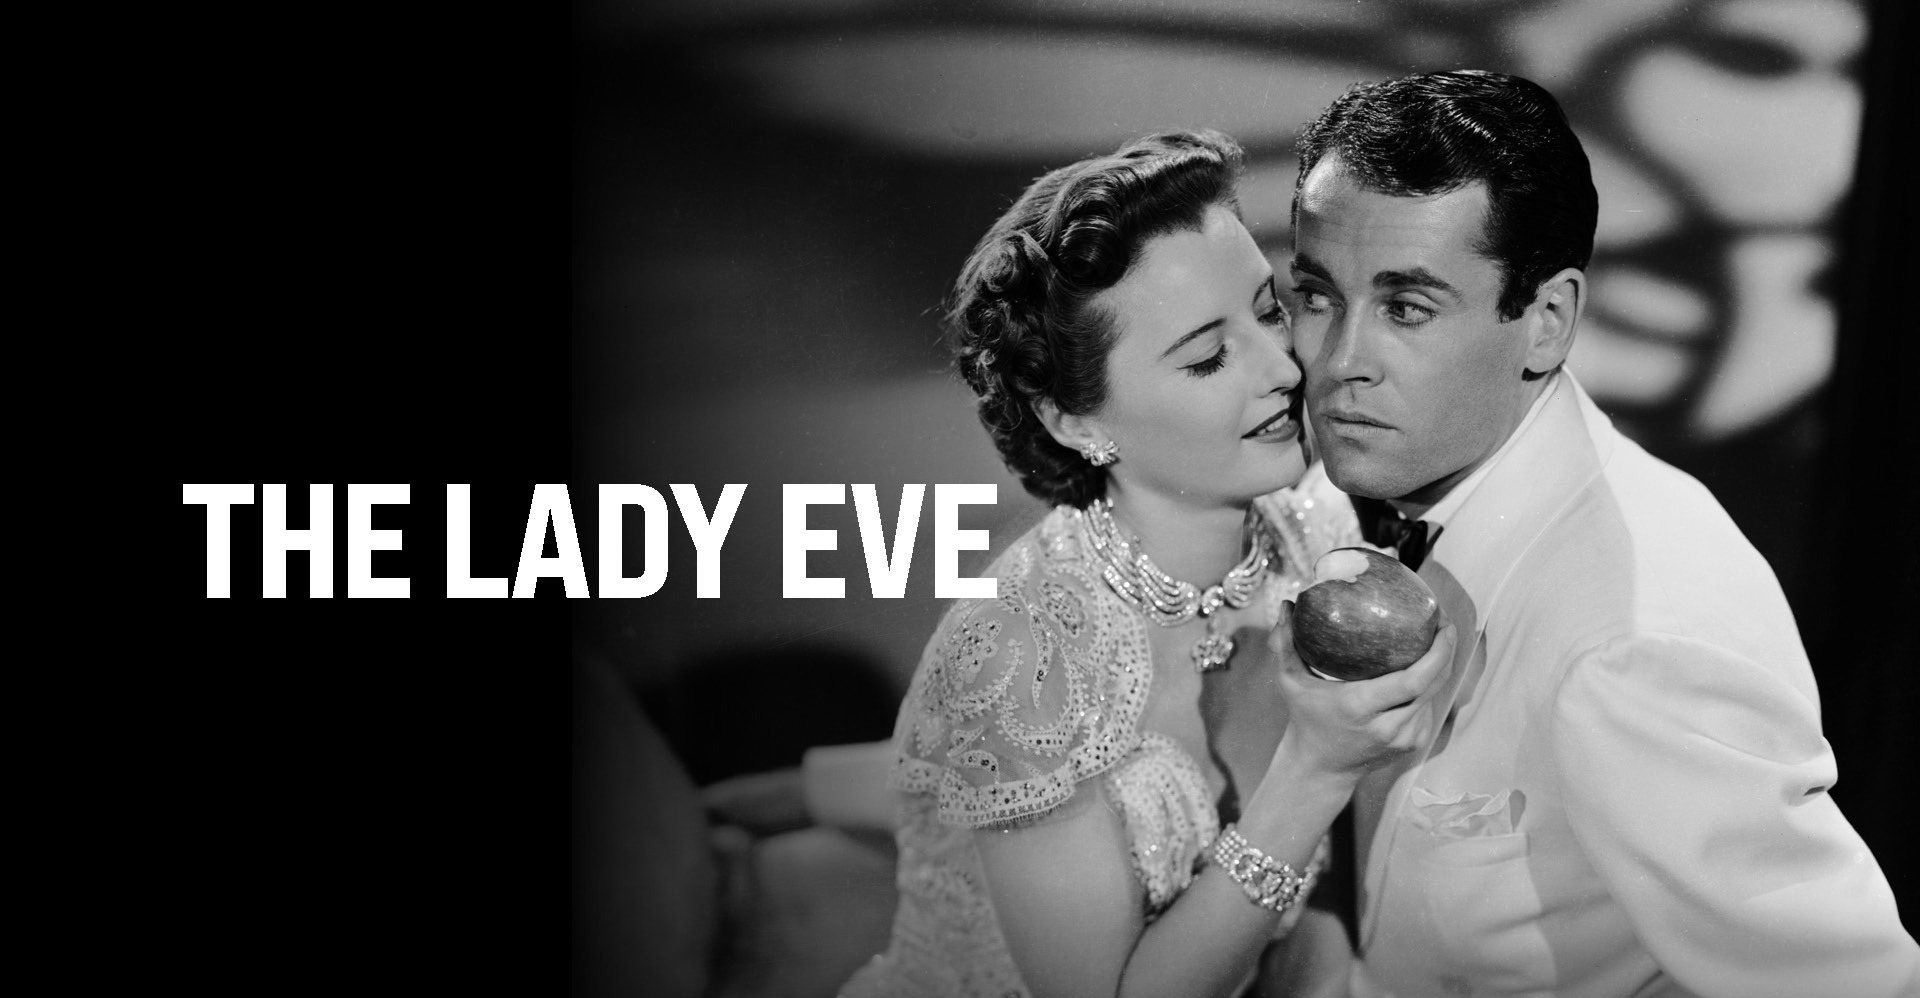 33-facts-about-the-movie-the-lady-eve